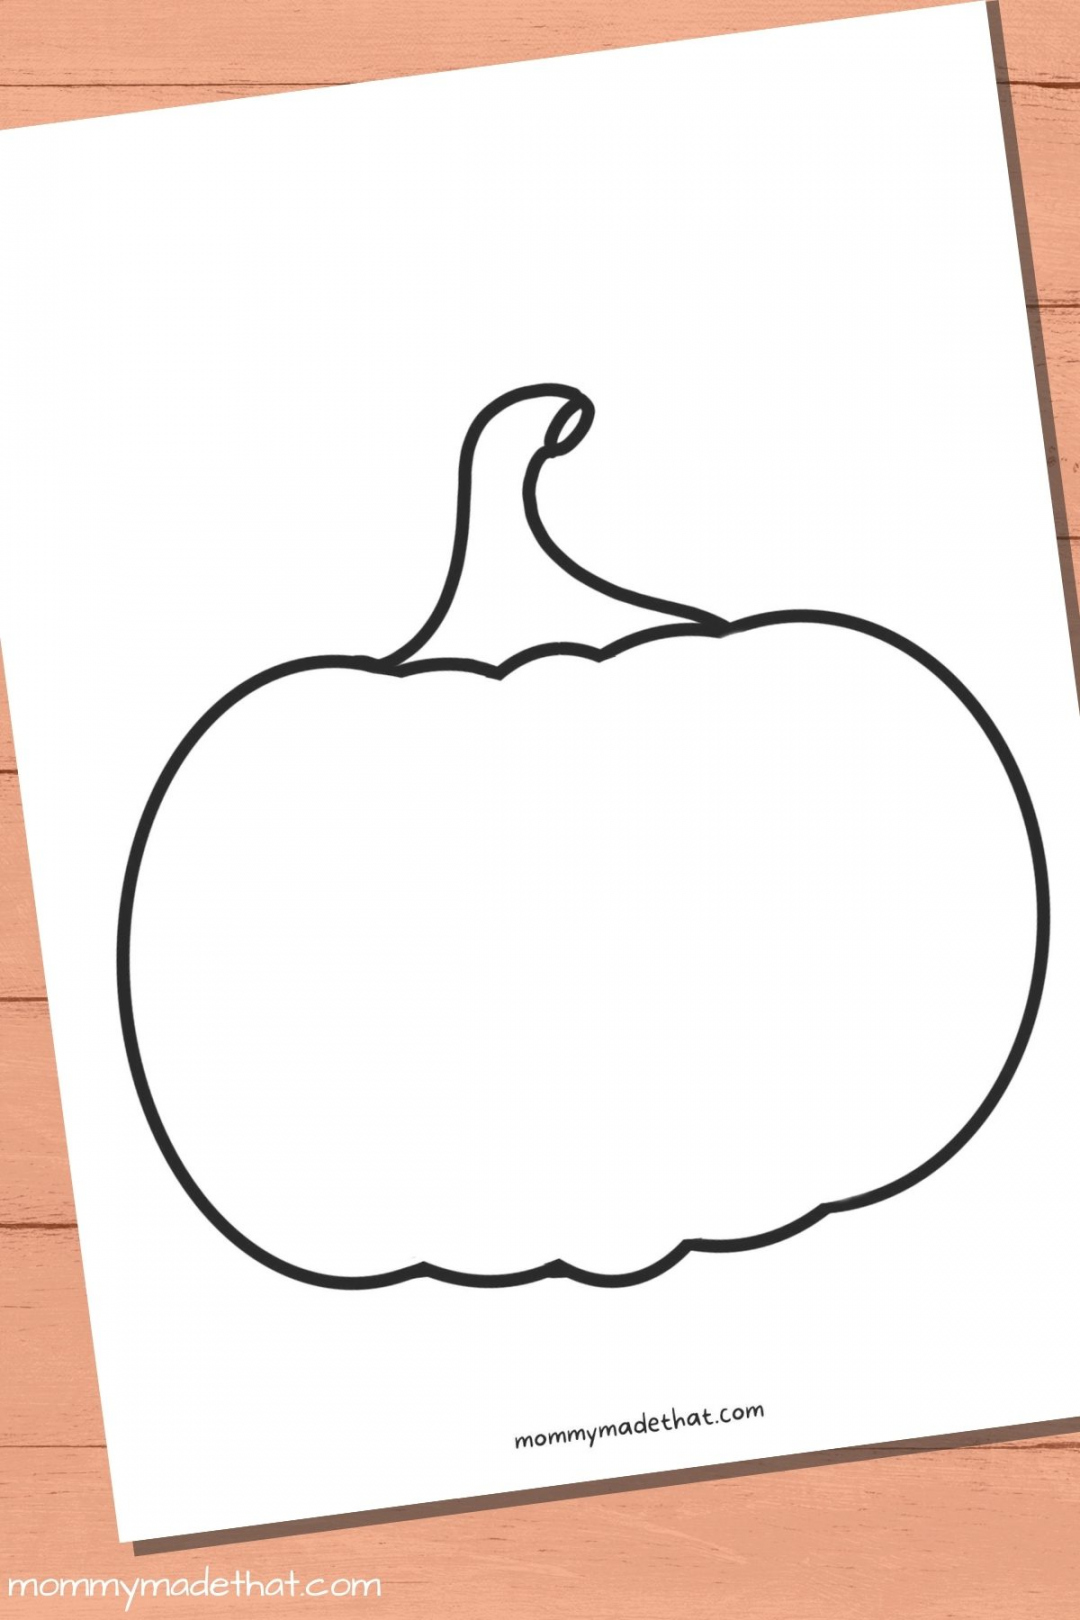 Free Printable Pumpkin Templates for Crafts and Activities - FREE Printables - Simple Pumpkin Outline